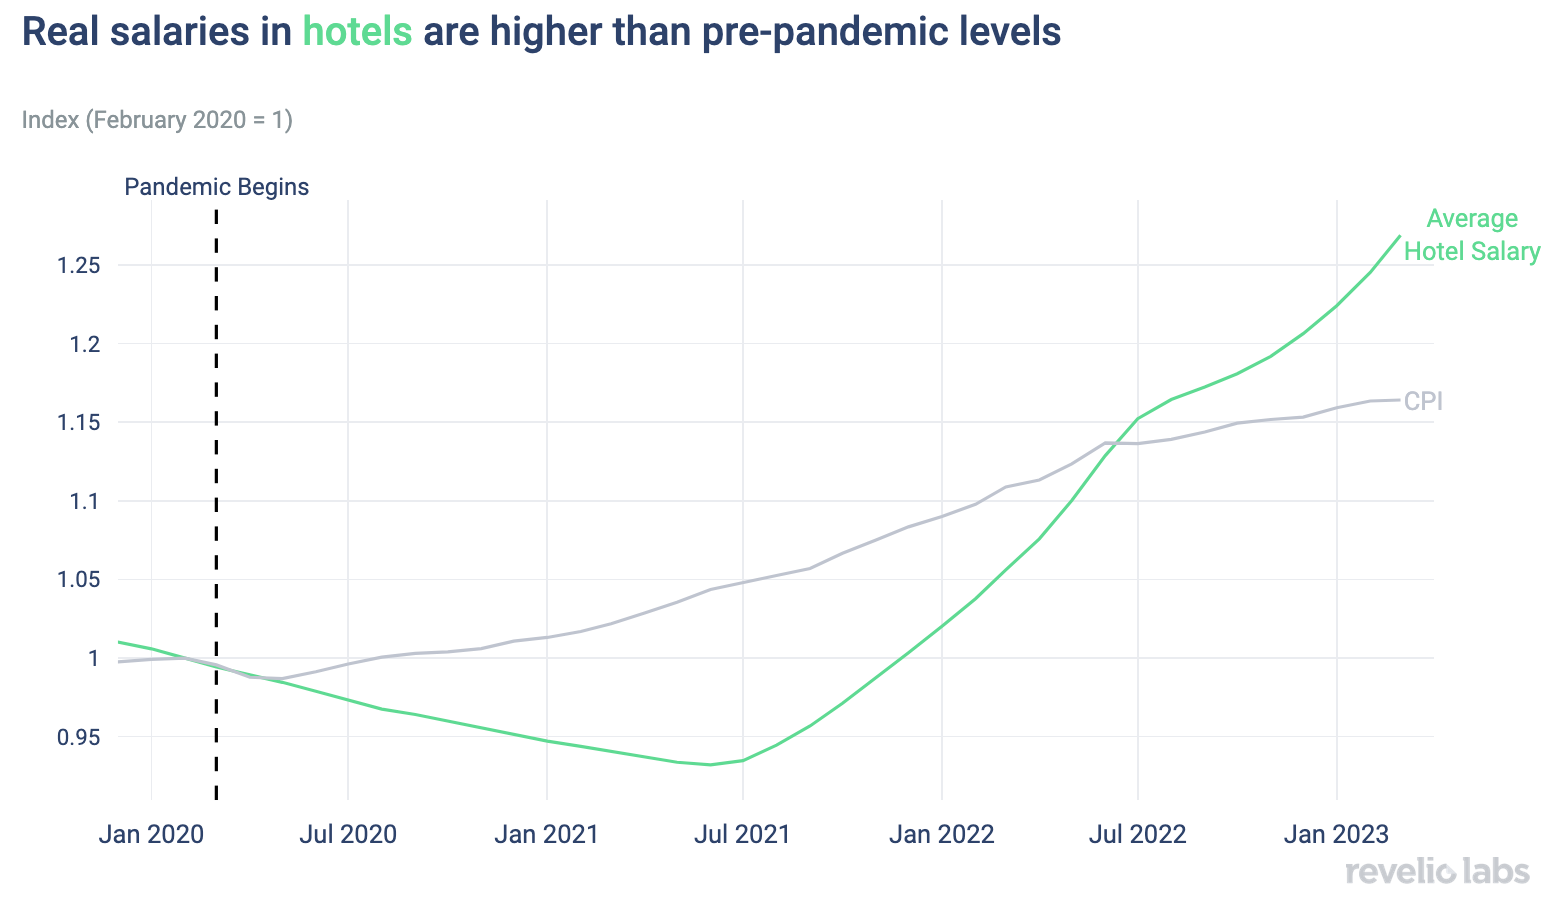 Real salaries in hotels are higher than pre-pandemic levels